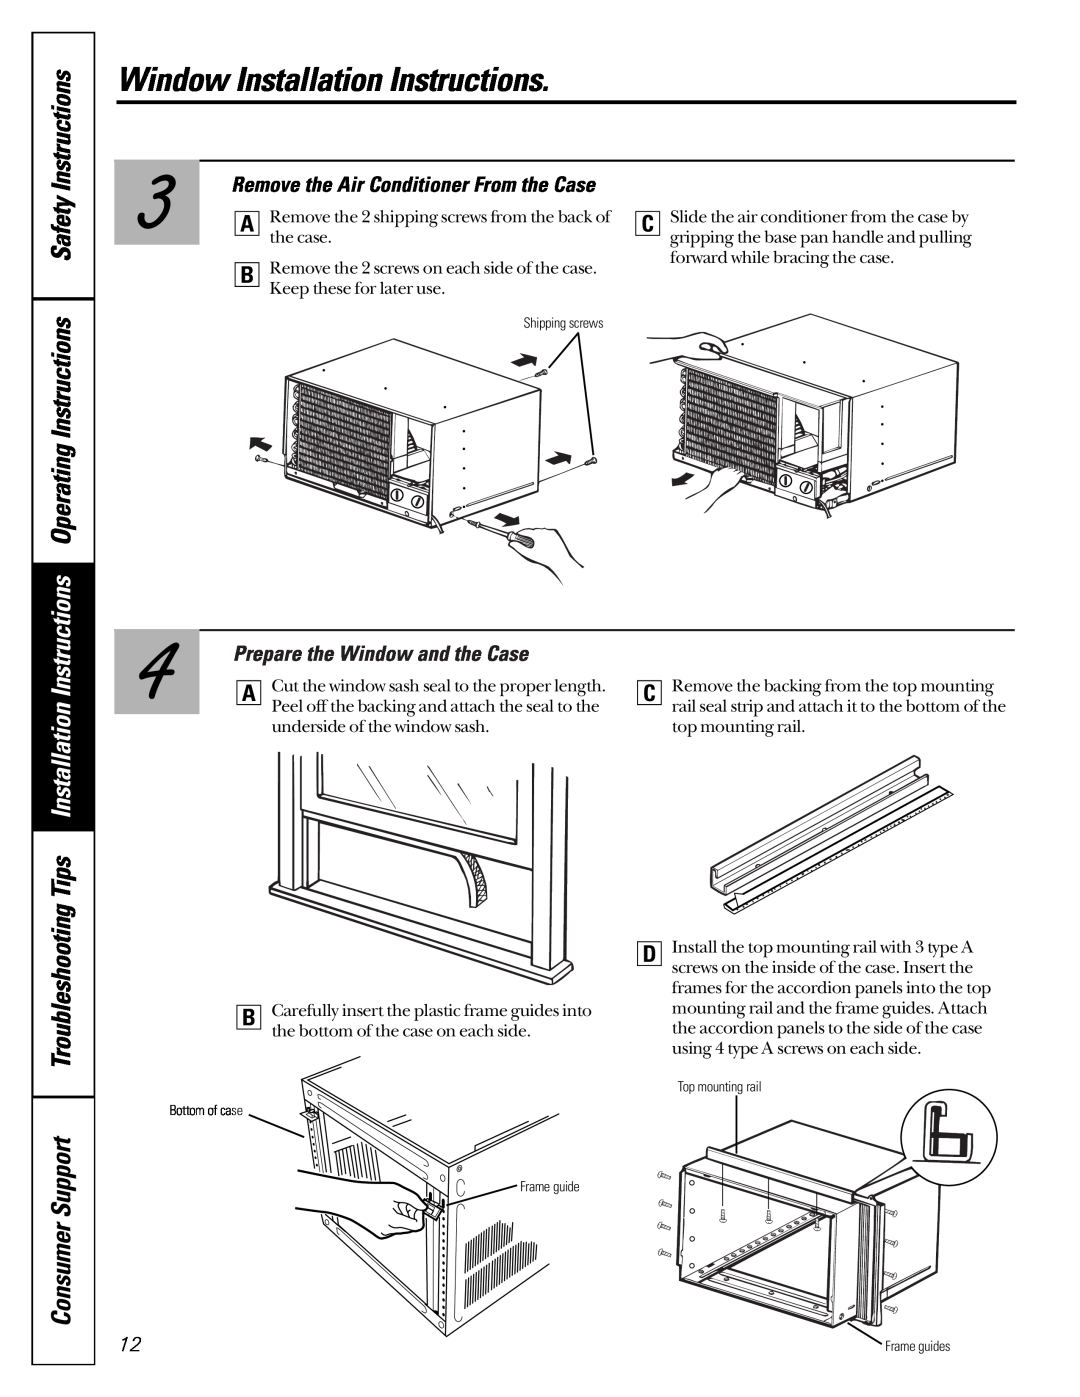 GE AG_07 Operating Instructions Safety, Tips Installation Instructions, Troubleshooting, Prepare the Window and the Case 